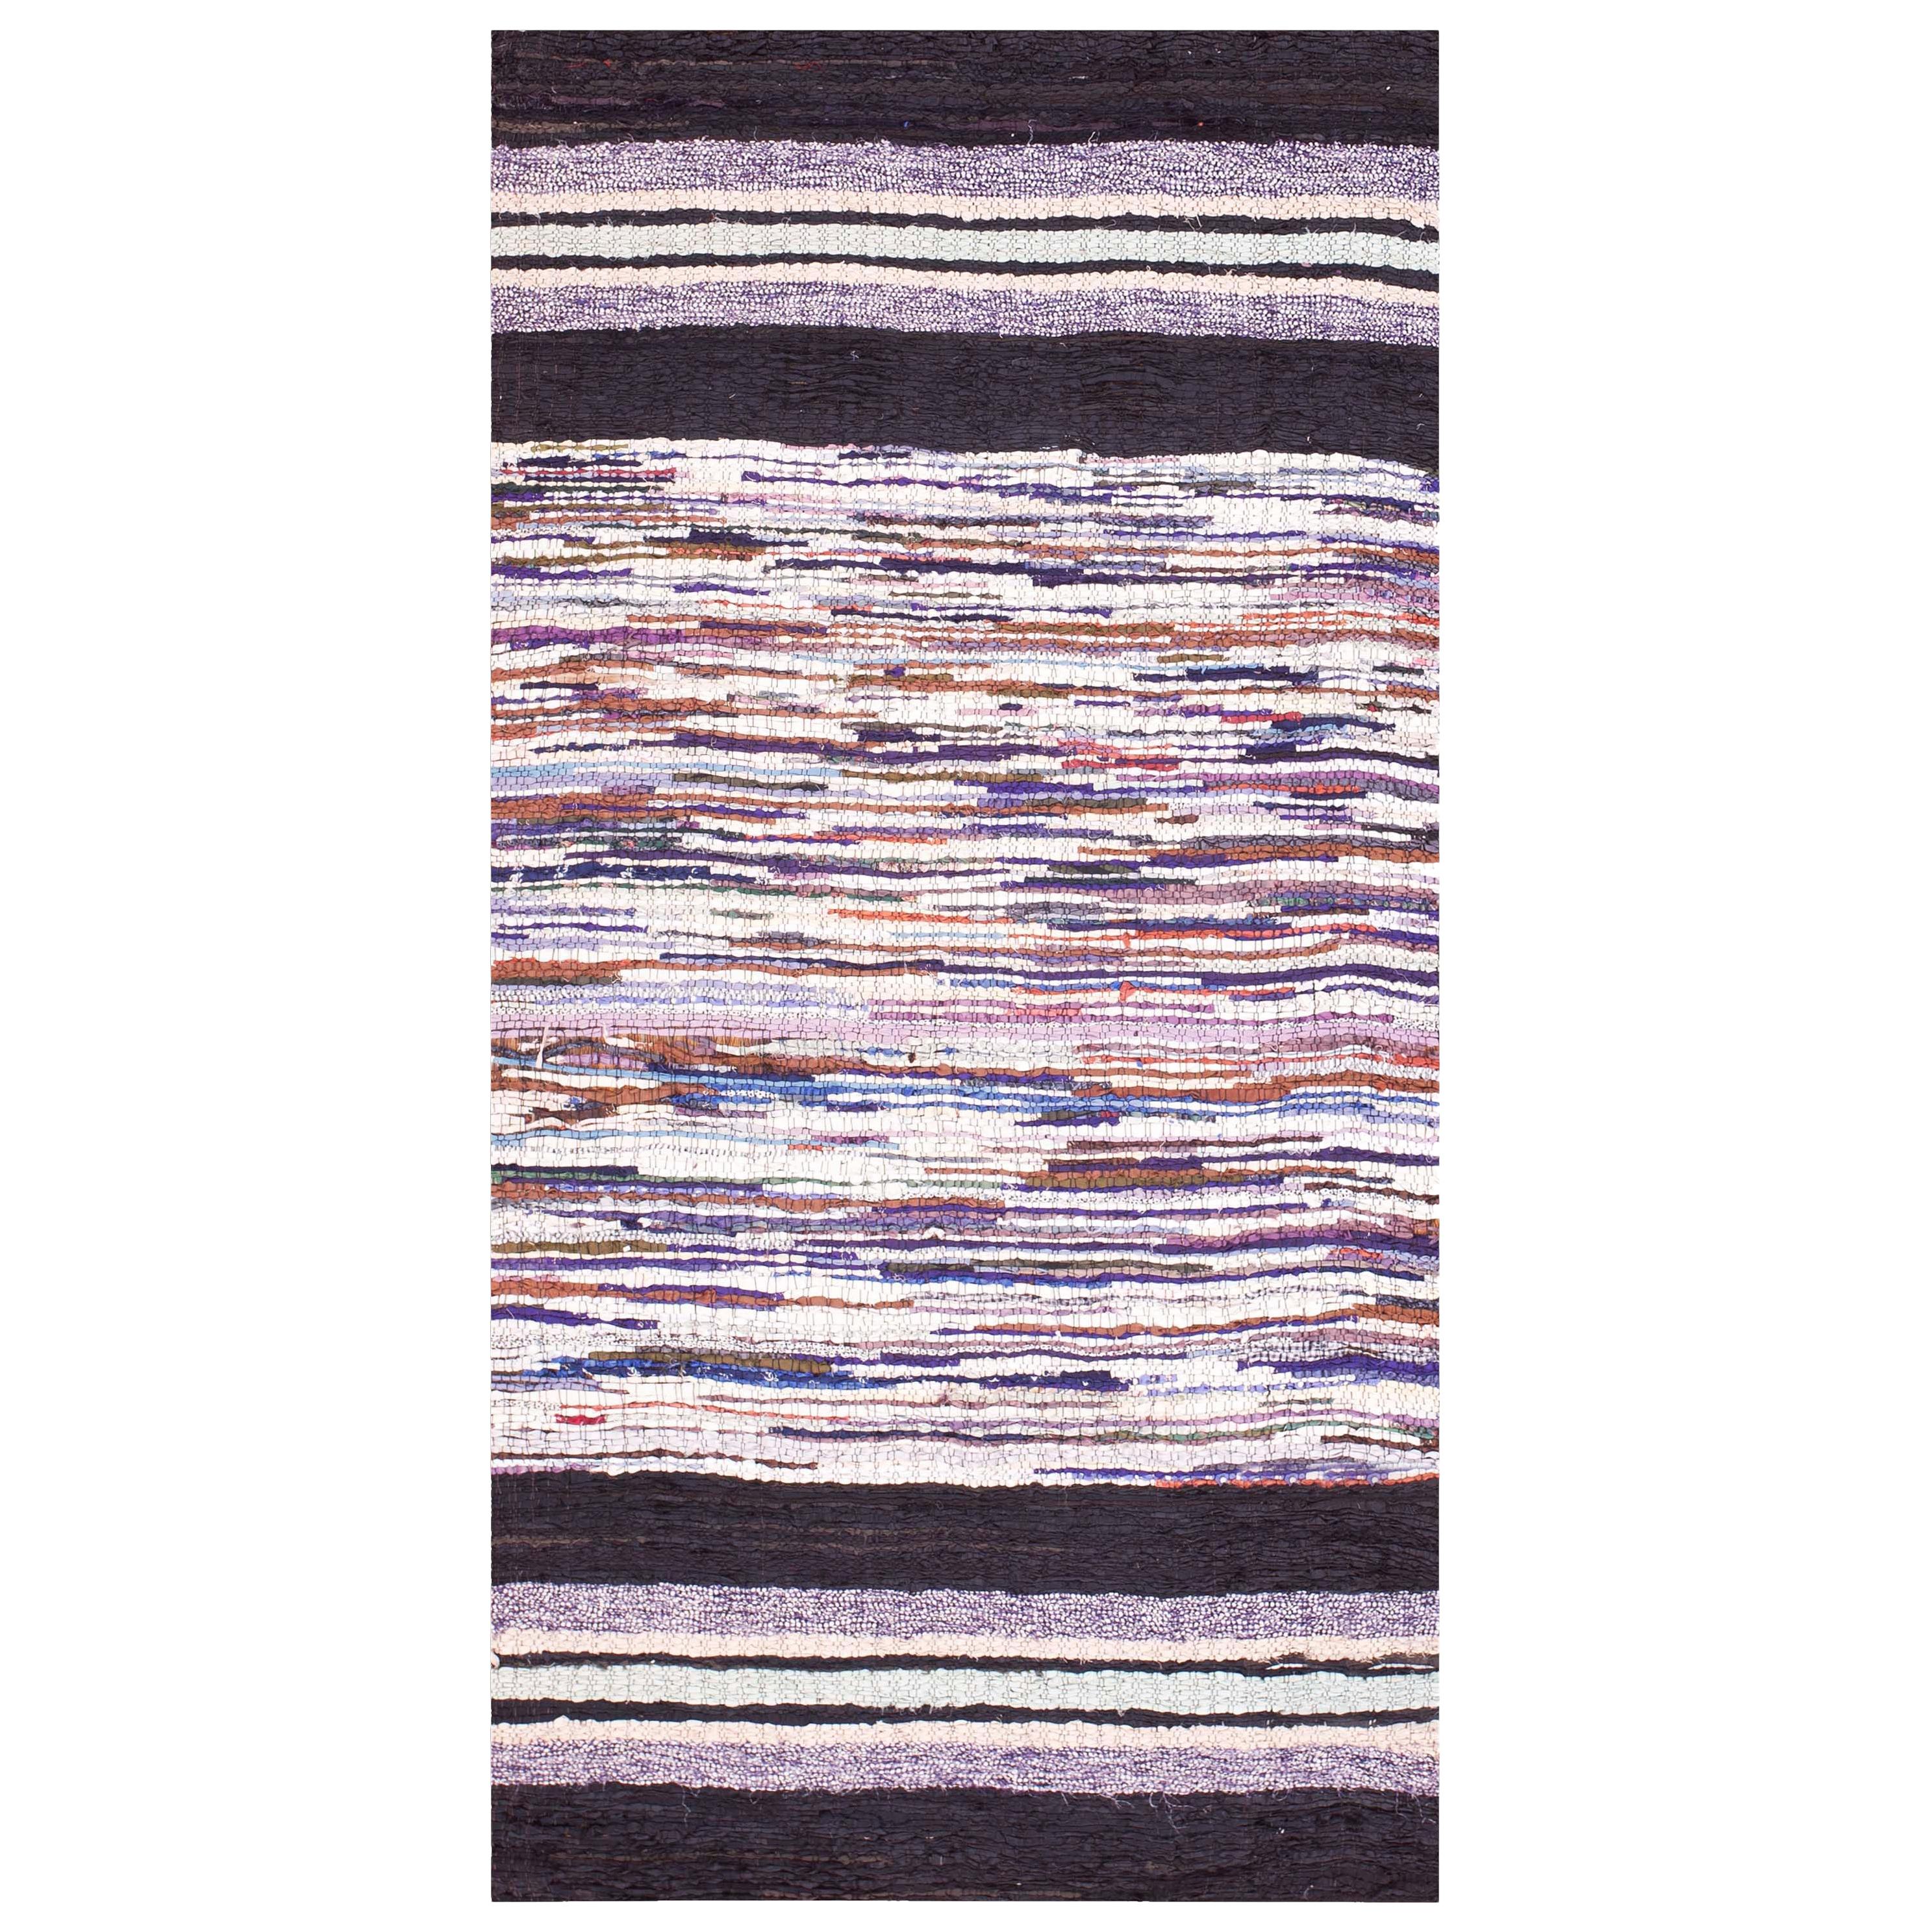 Antique American Rag Rug 3' 4" x 6' 4"  For Sale